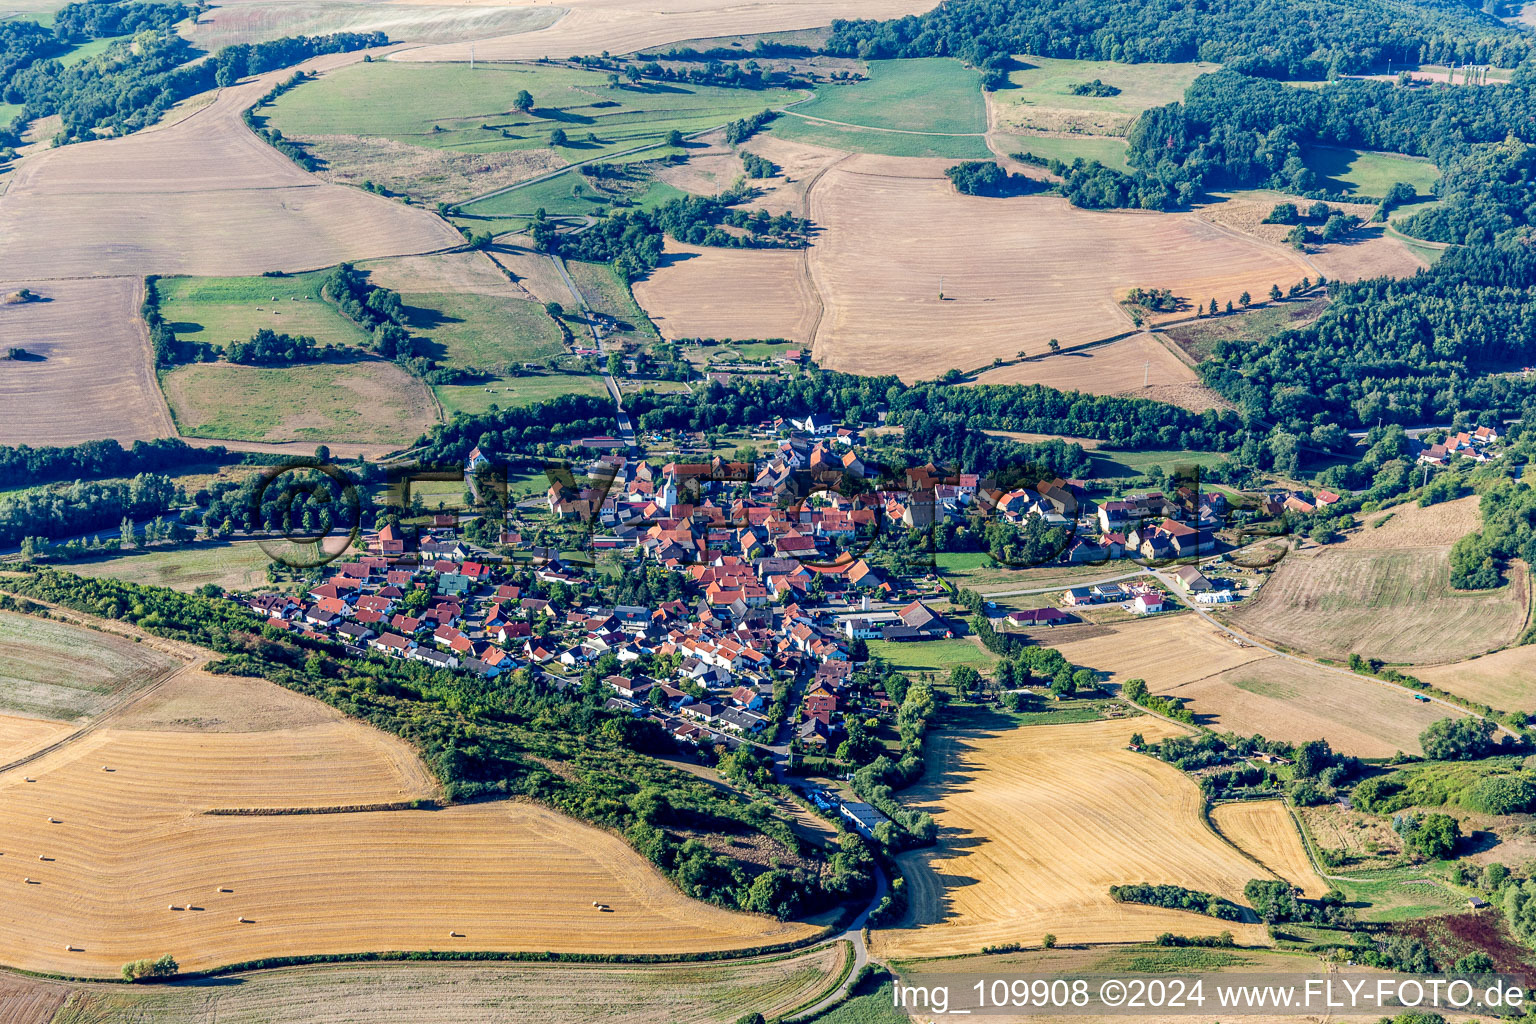 Agricultural land and field borders surround the settlement area of the village in Niedermoschel in the state Rhineland-Palatinate, Germany